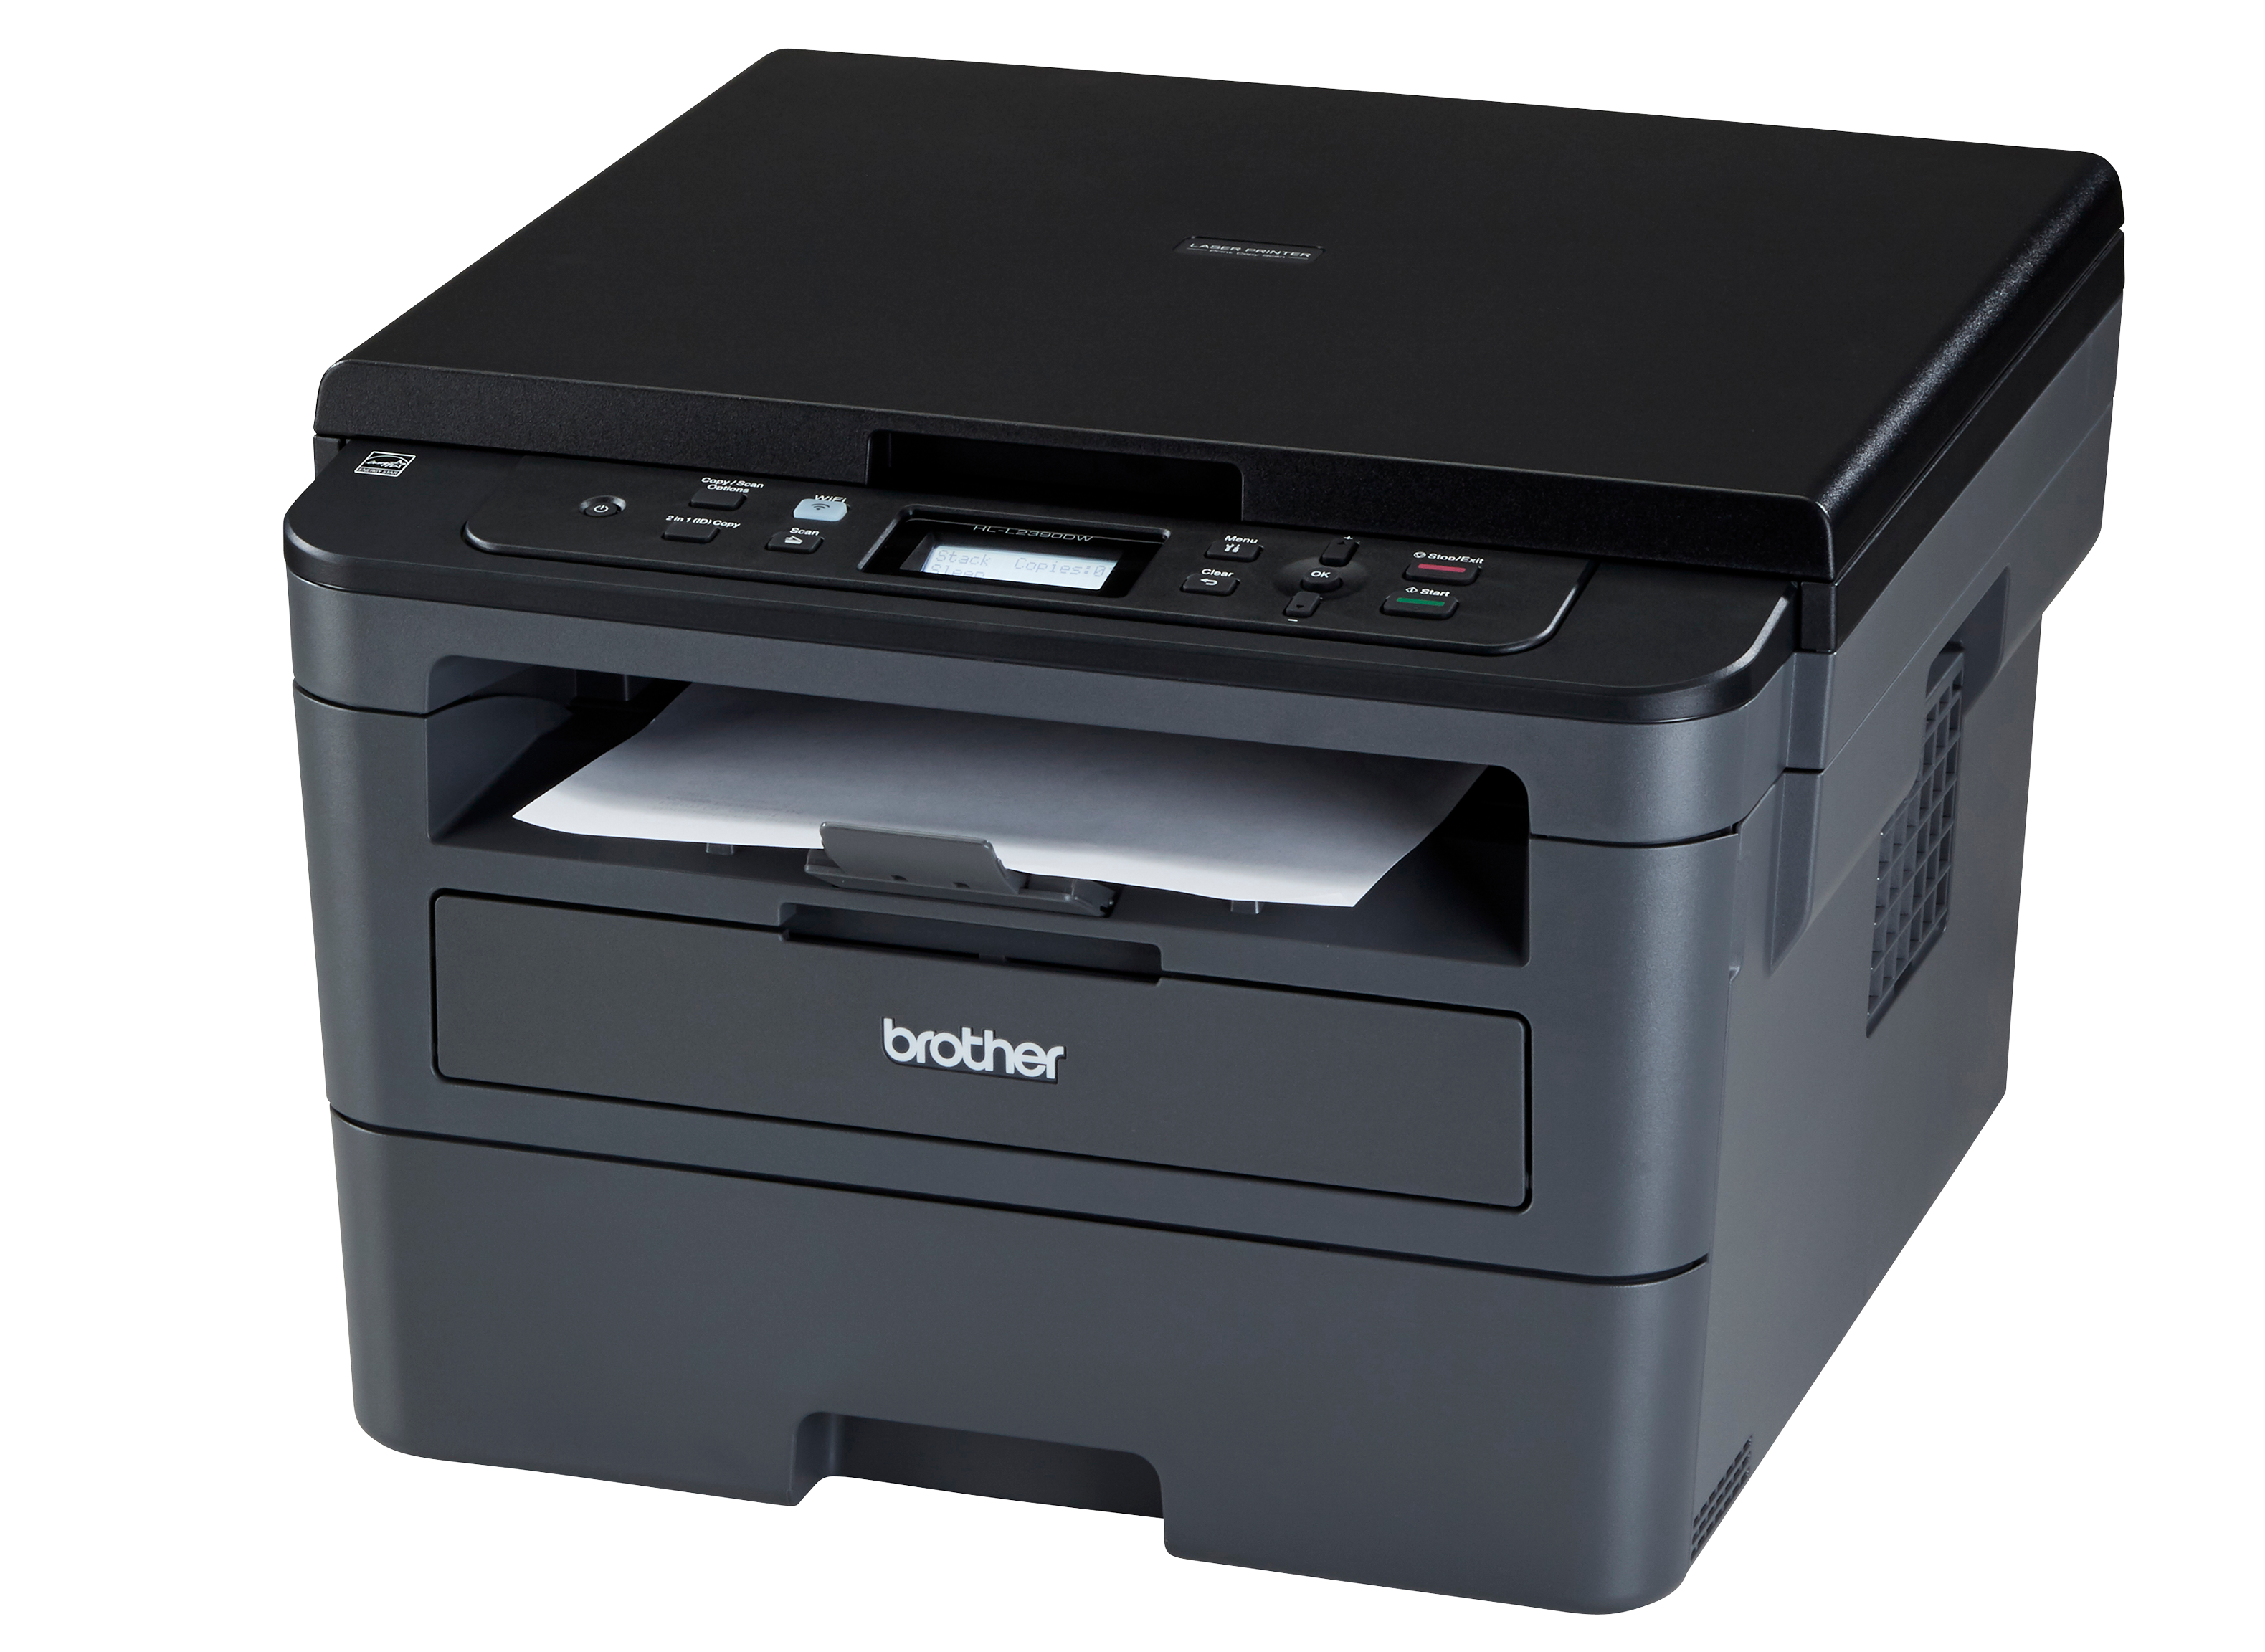 Brother HL-L2390DW Printer Review - Consumer Reports